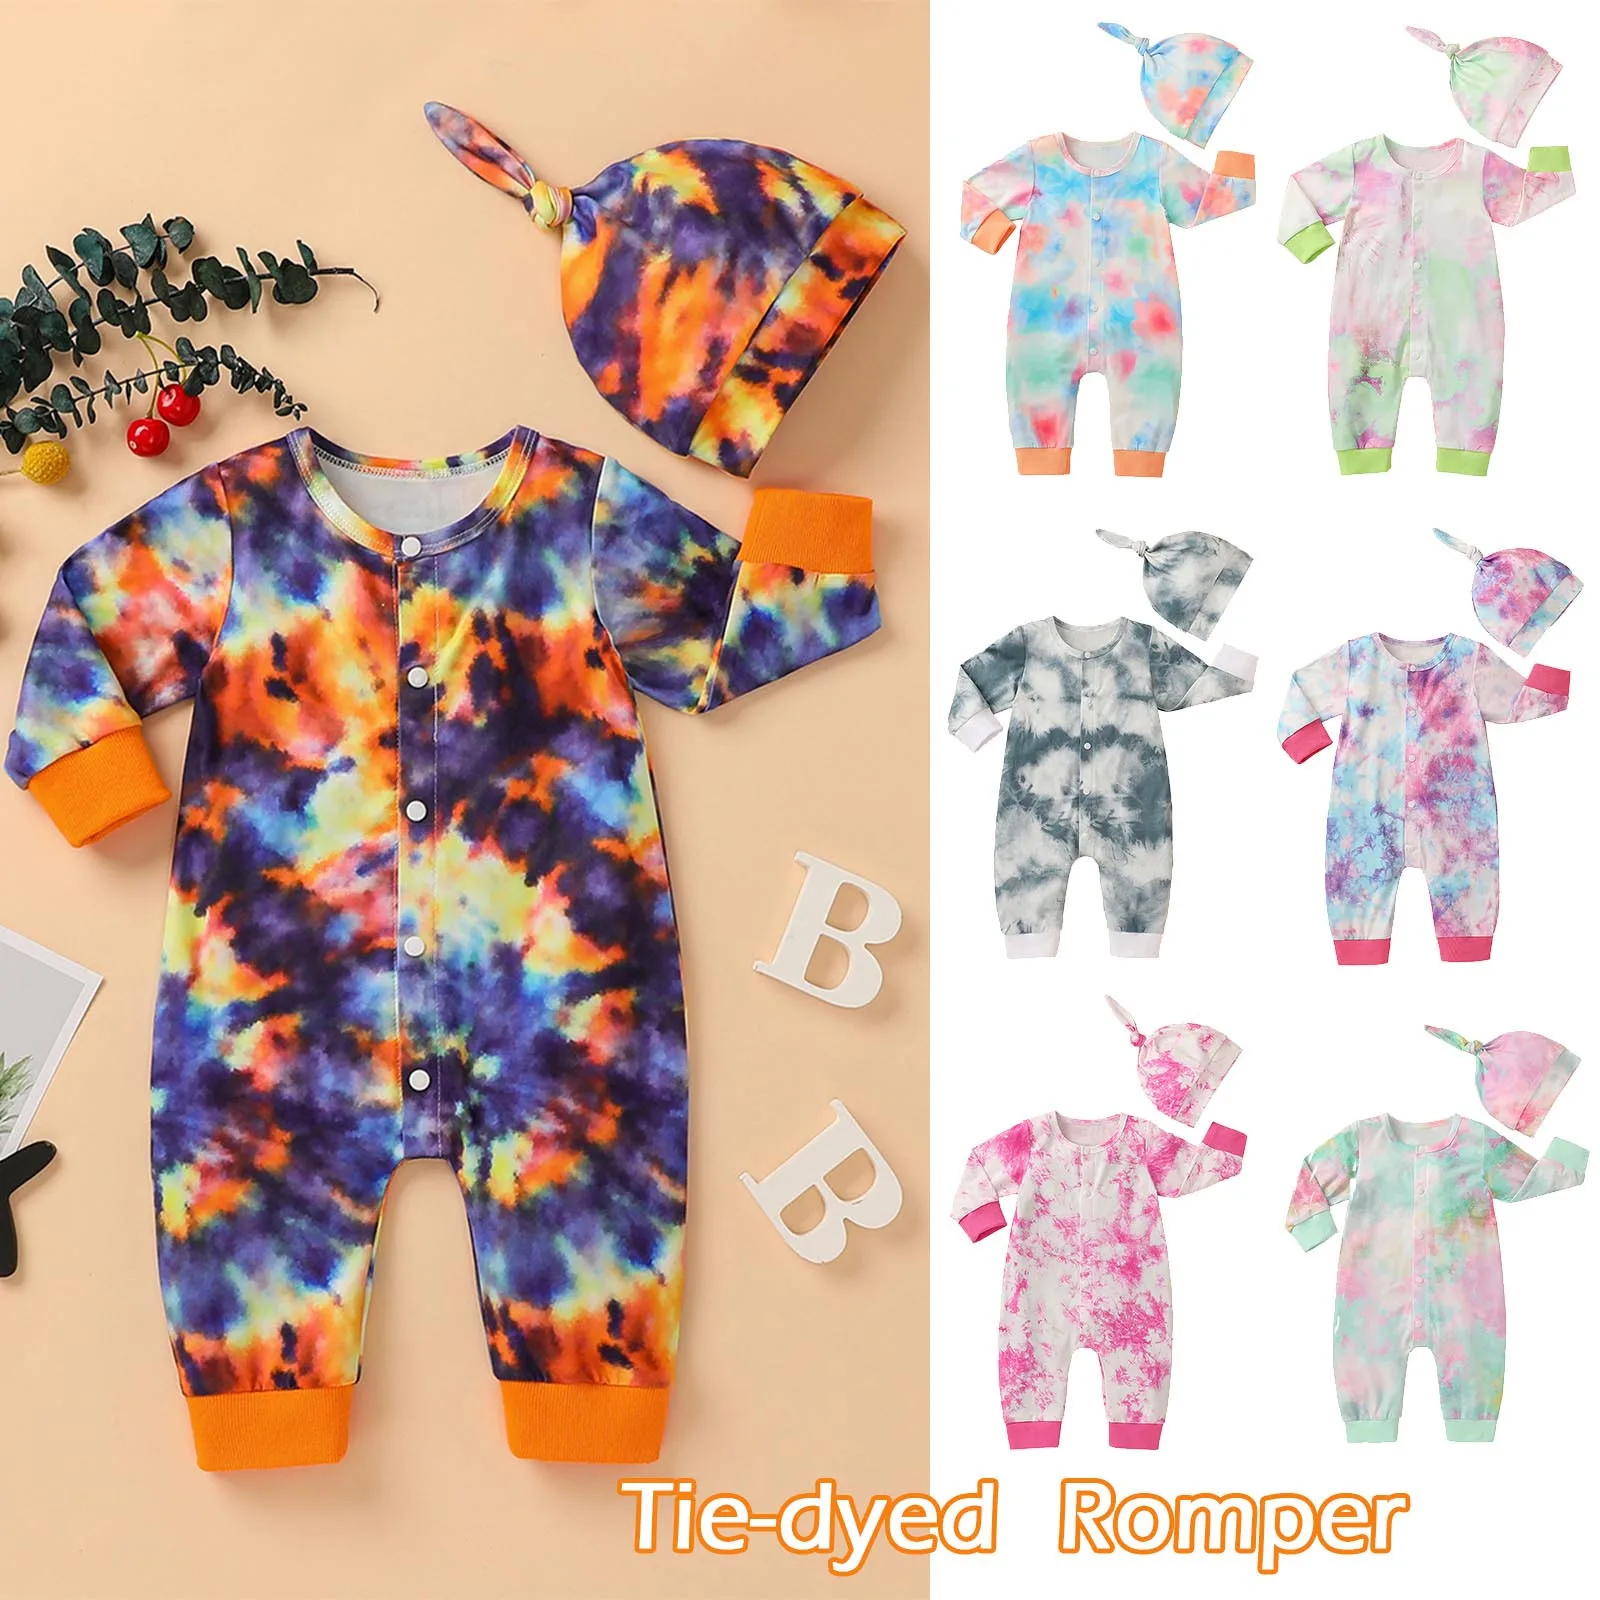 Baby Clothes Baby Clothes Girls Sets Boys Romper Long Sleeve Tie-dyed Jumpsuits Clothes Overalls With Hat детская одежда 1